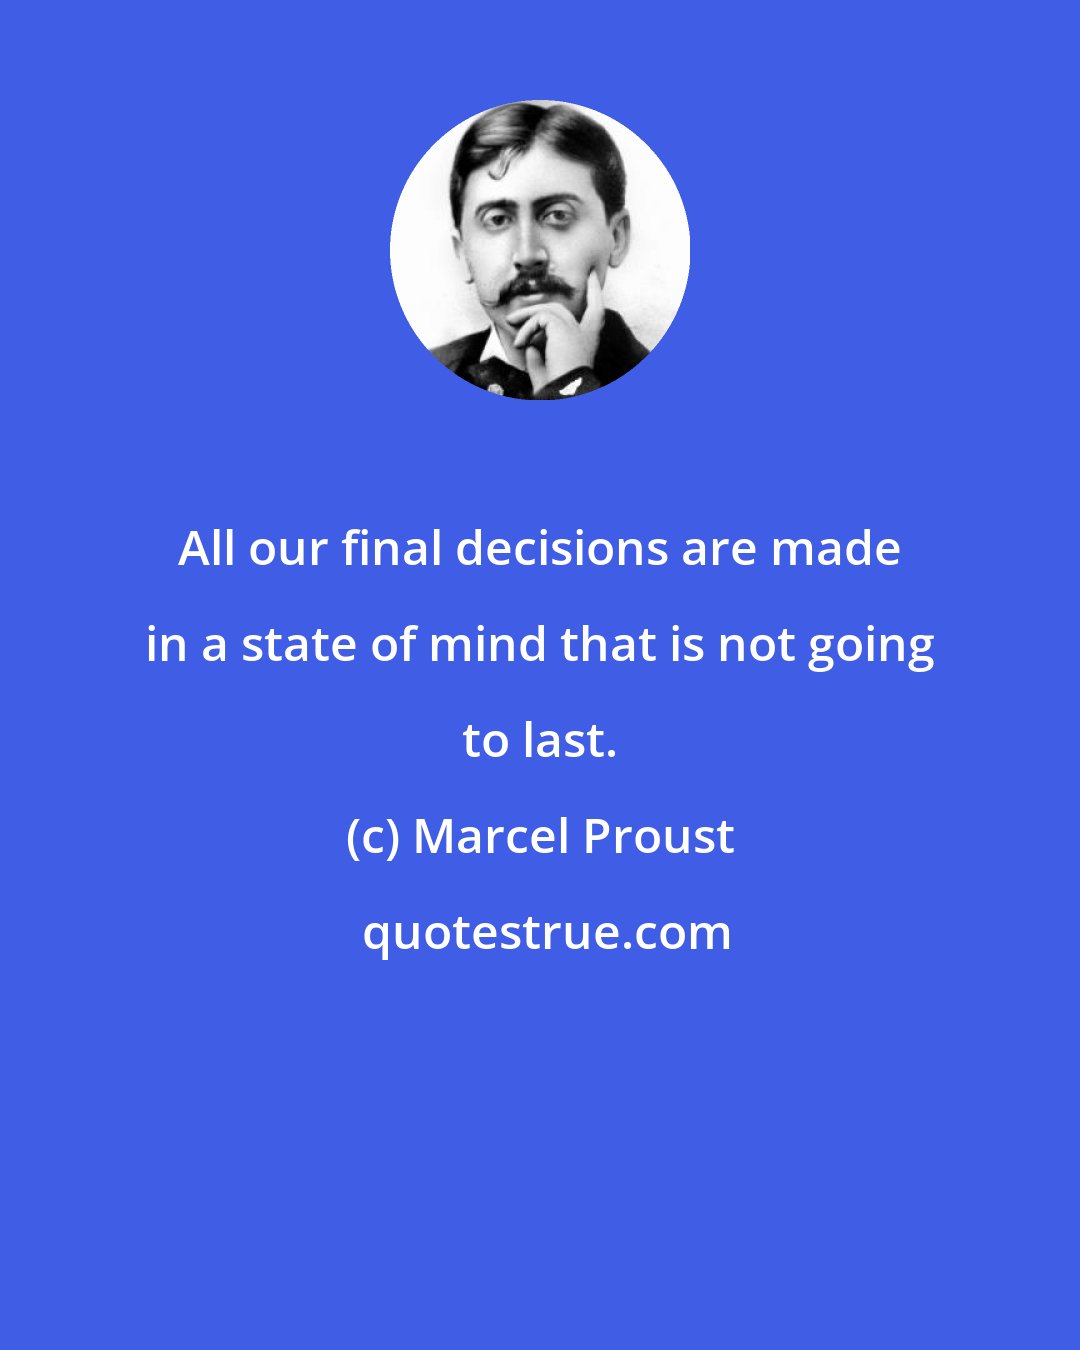 Marcel Proust: All our final decisions are made in a state of mind that is not going to last.